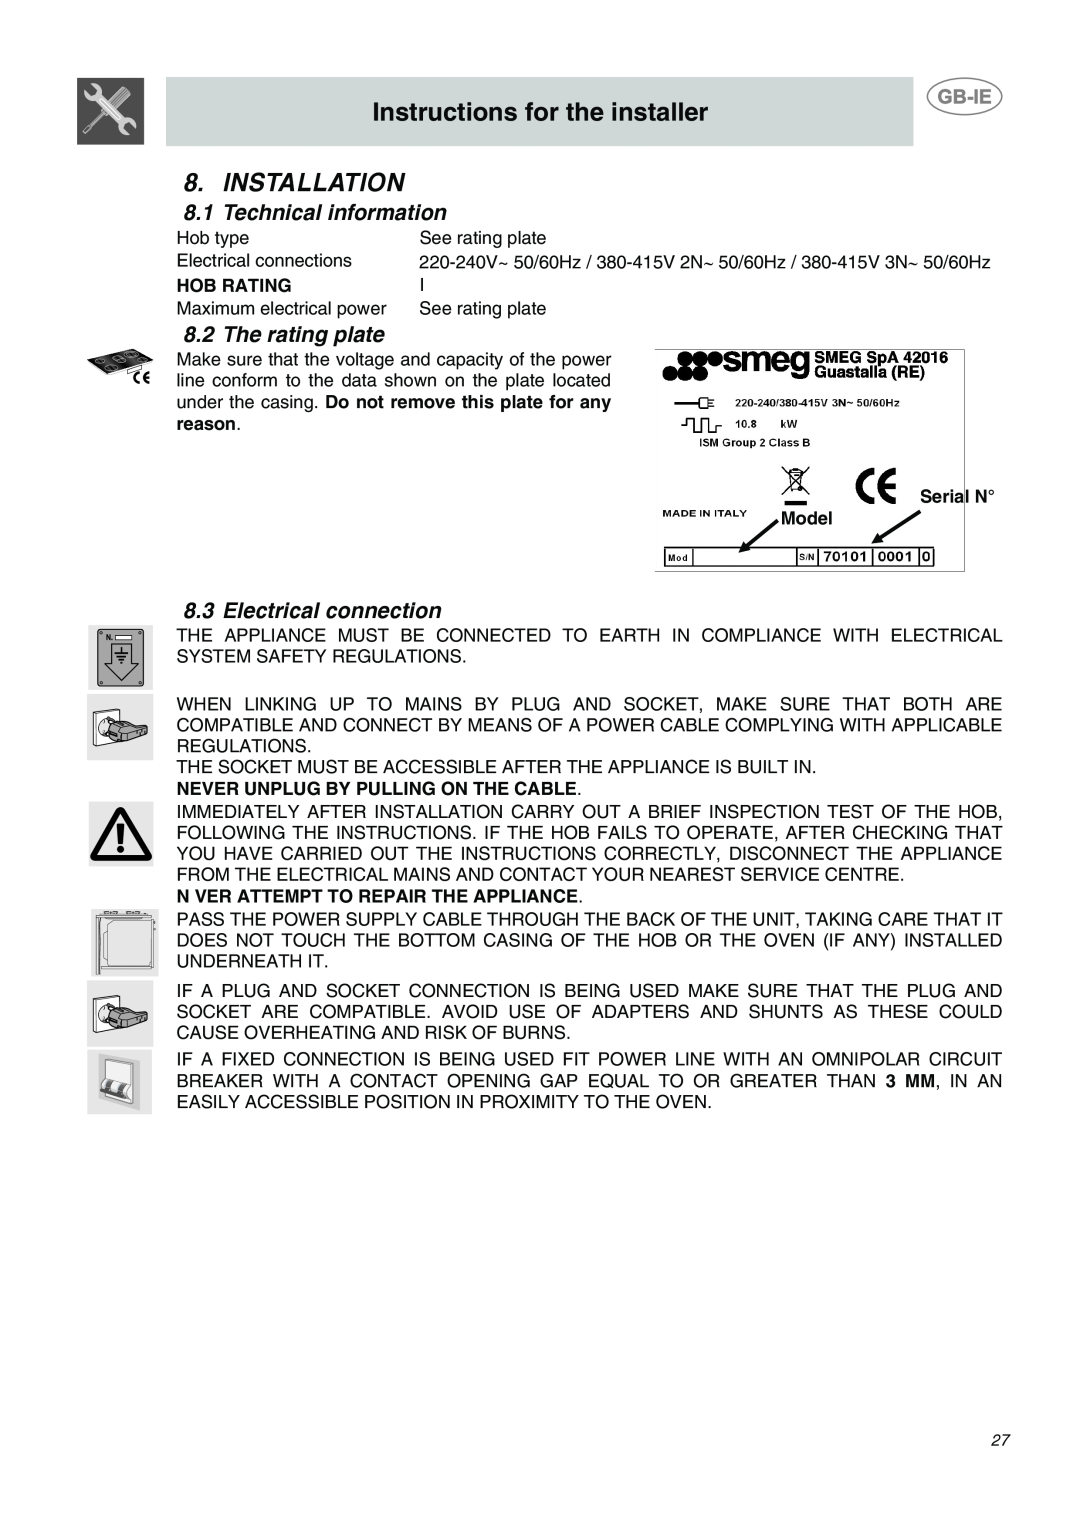 Smeg SE2631ID1 manual Instructions for the installer, Installation, Technical information, The rating plate, Hob Rating 